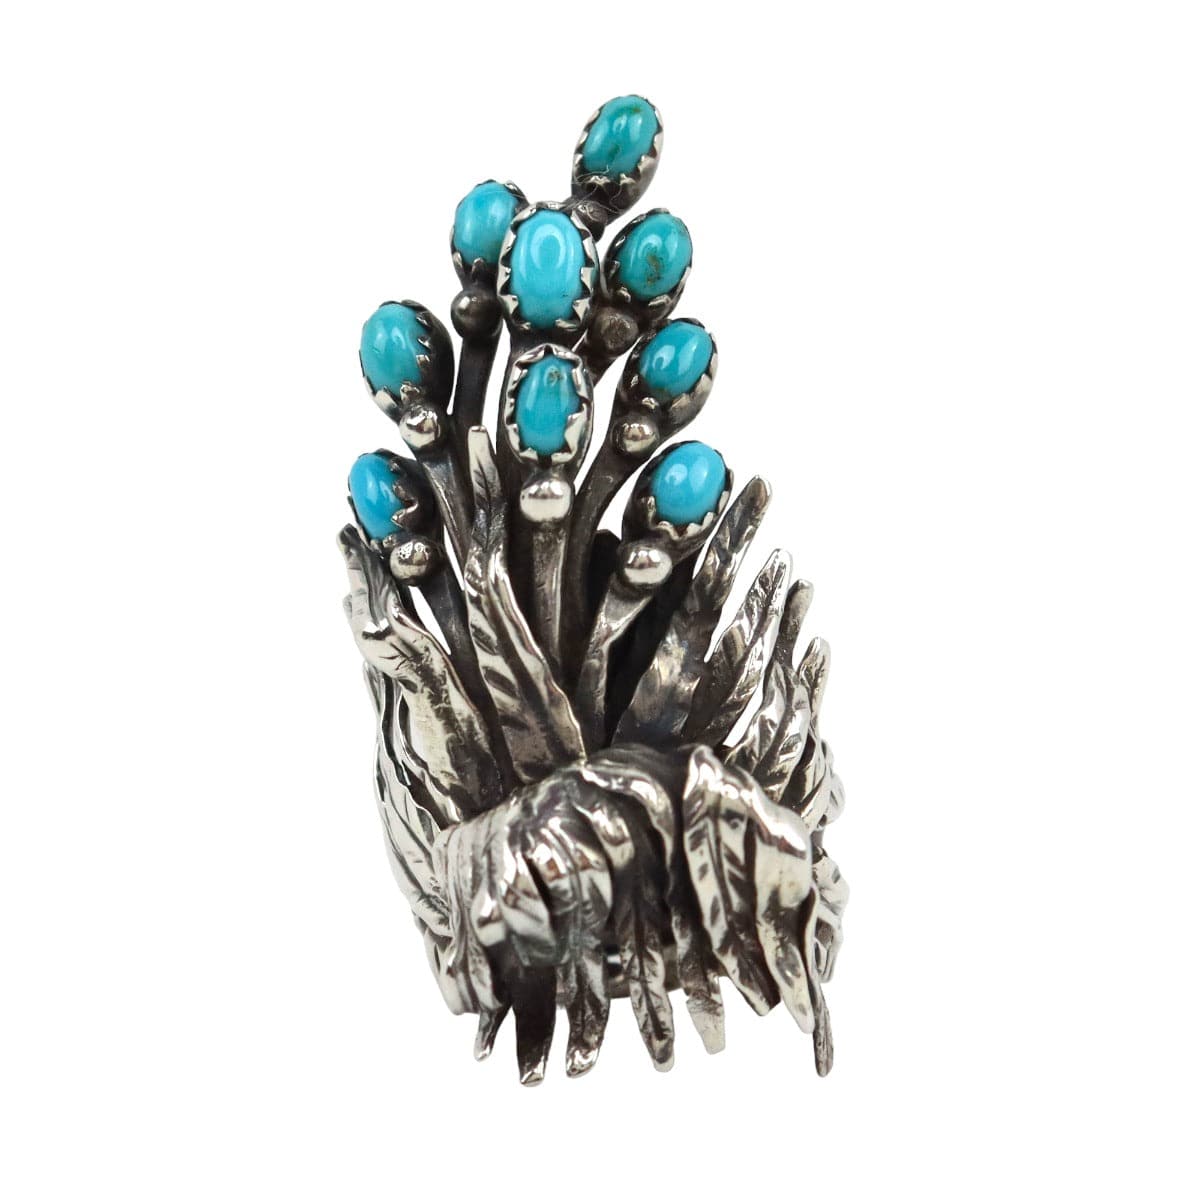 Frank Patania Sr. (1898-1964) - Turquoise and Silver Ring c. 1944, size 3 (J91699-1022-002)